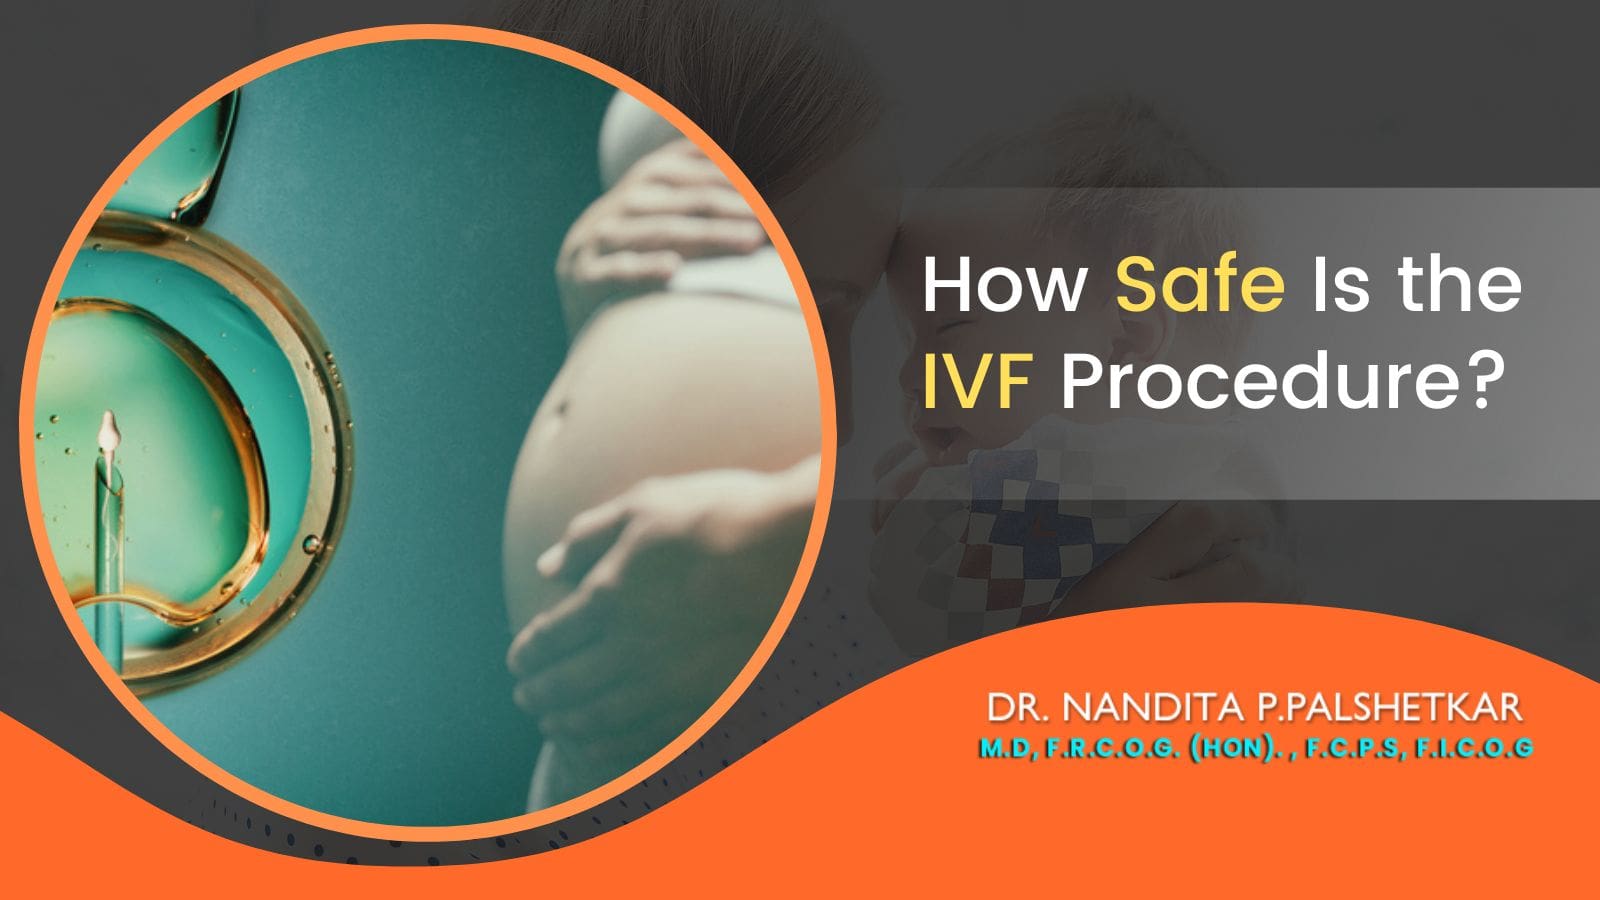 How Safe Is the IVF Procedure?